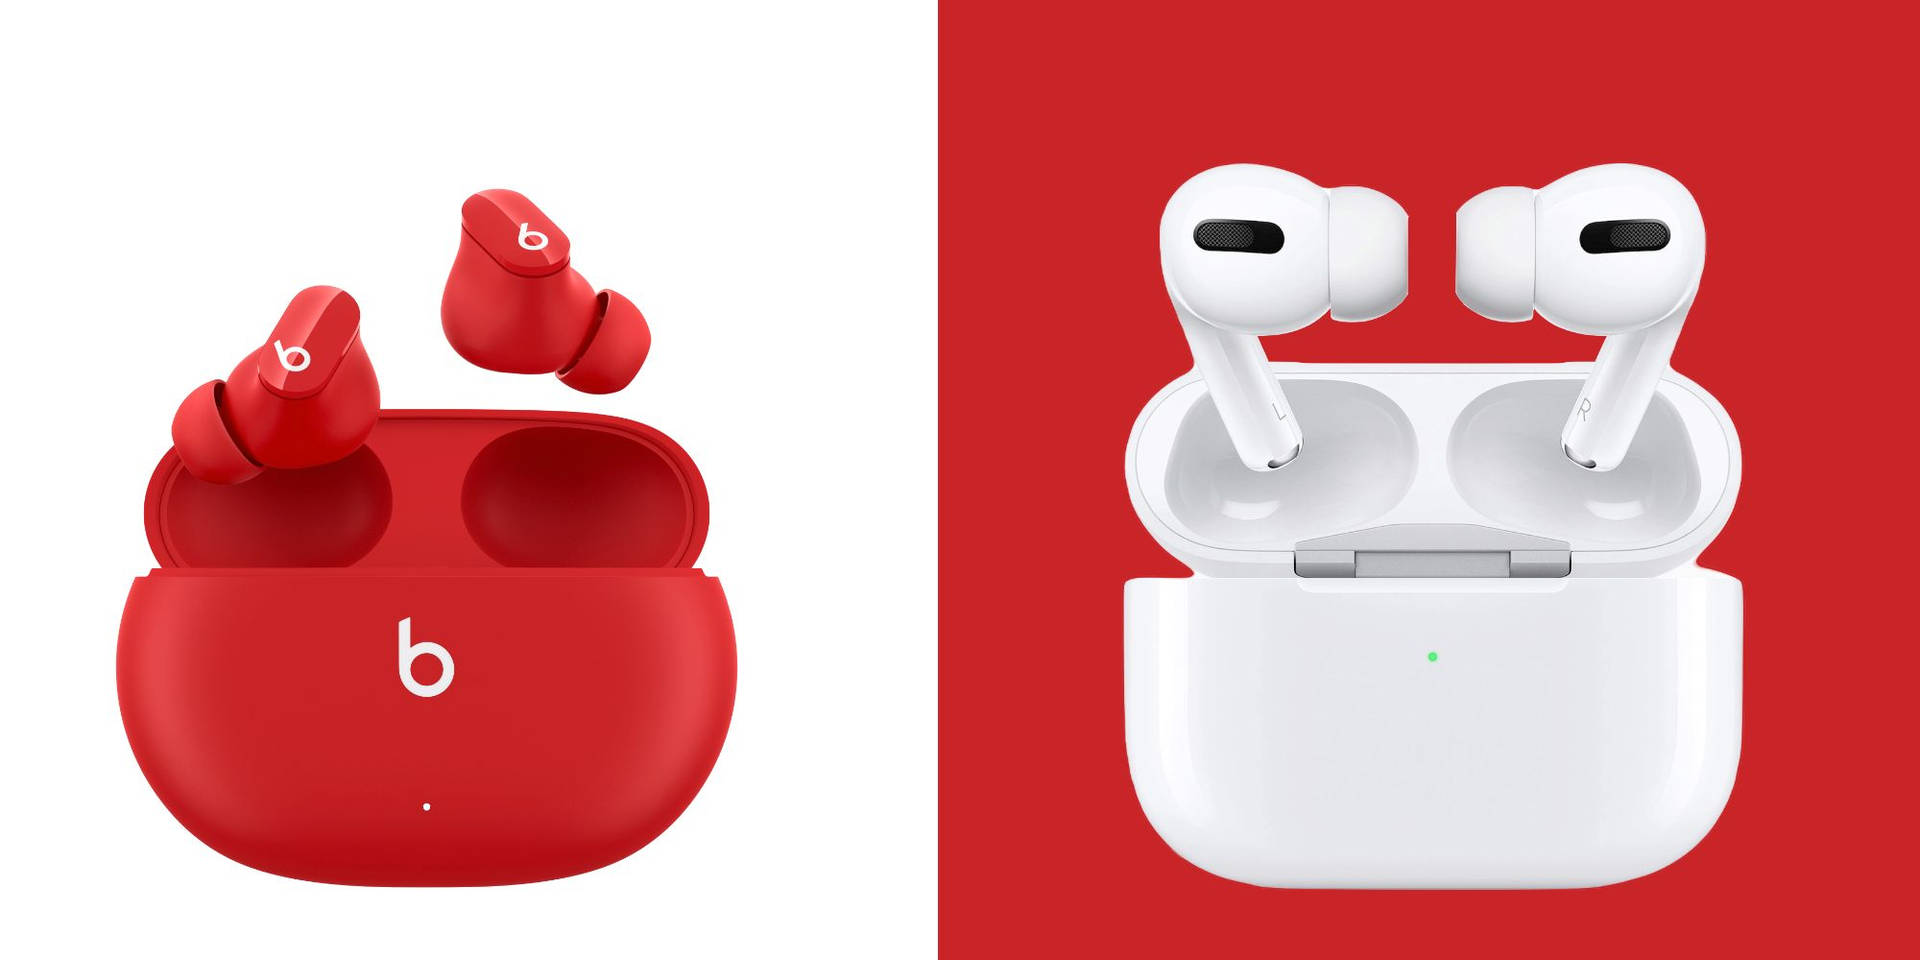 Airpods Vs. Beats Buds Background